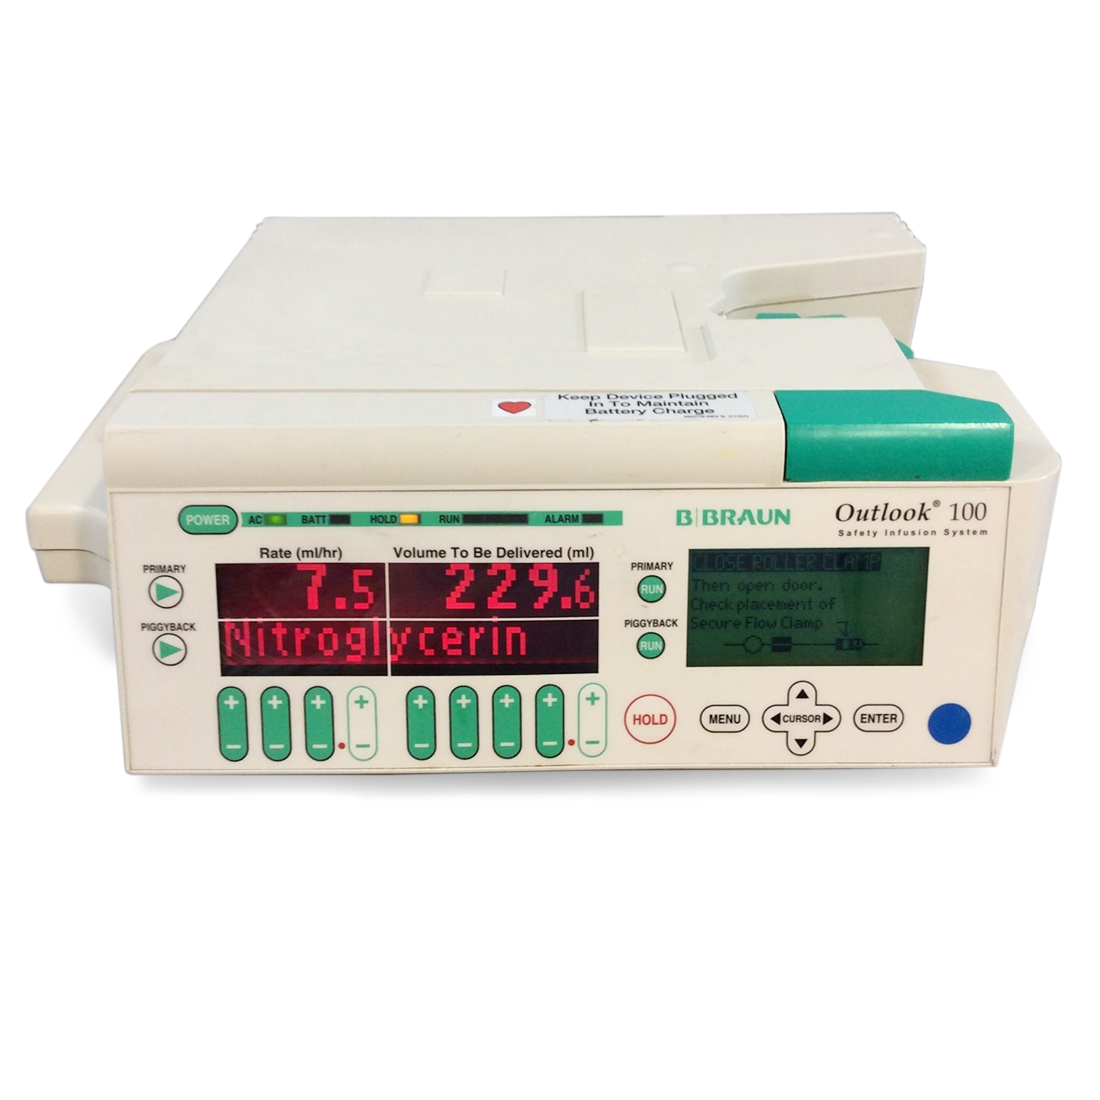 B Braun Outlook 100 Single Channel Infusion Pump